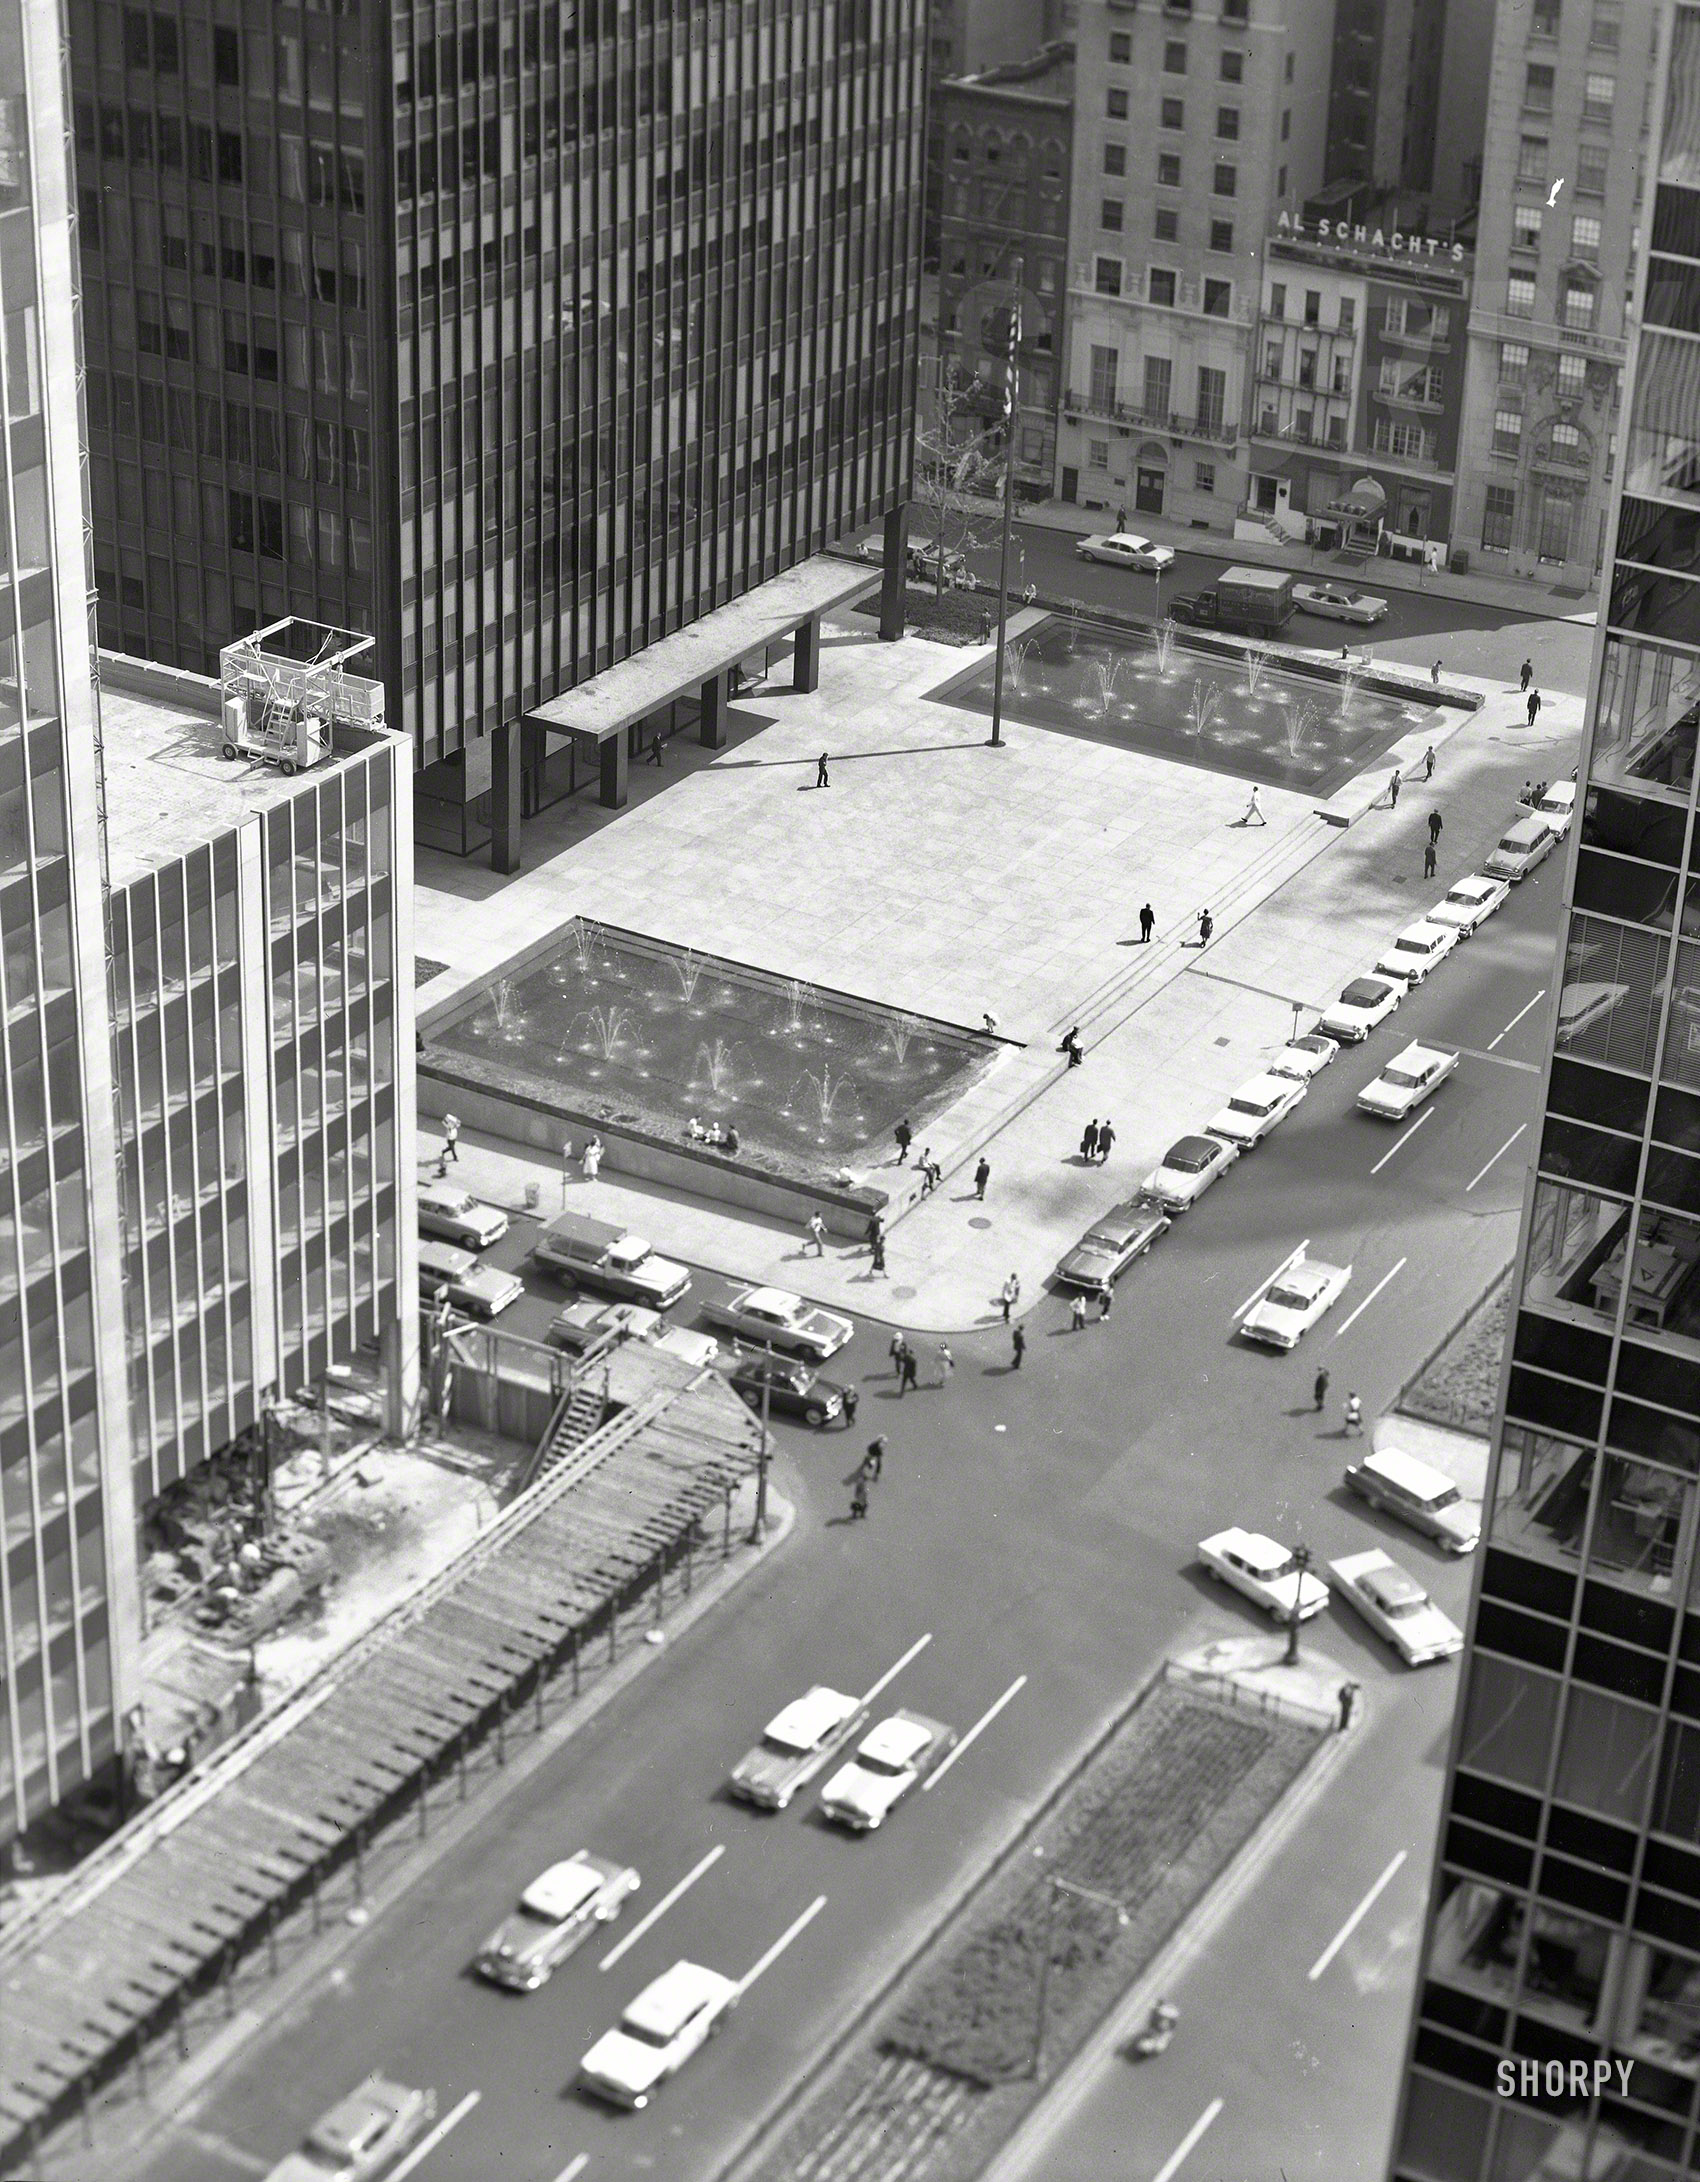 July 8, 1960. "New York City views. Seagram Building plaza, from 400 Park Avenue roof." Large-format negative by Gottscho-Schleisner. View full size.